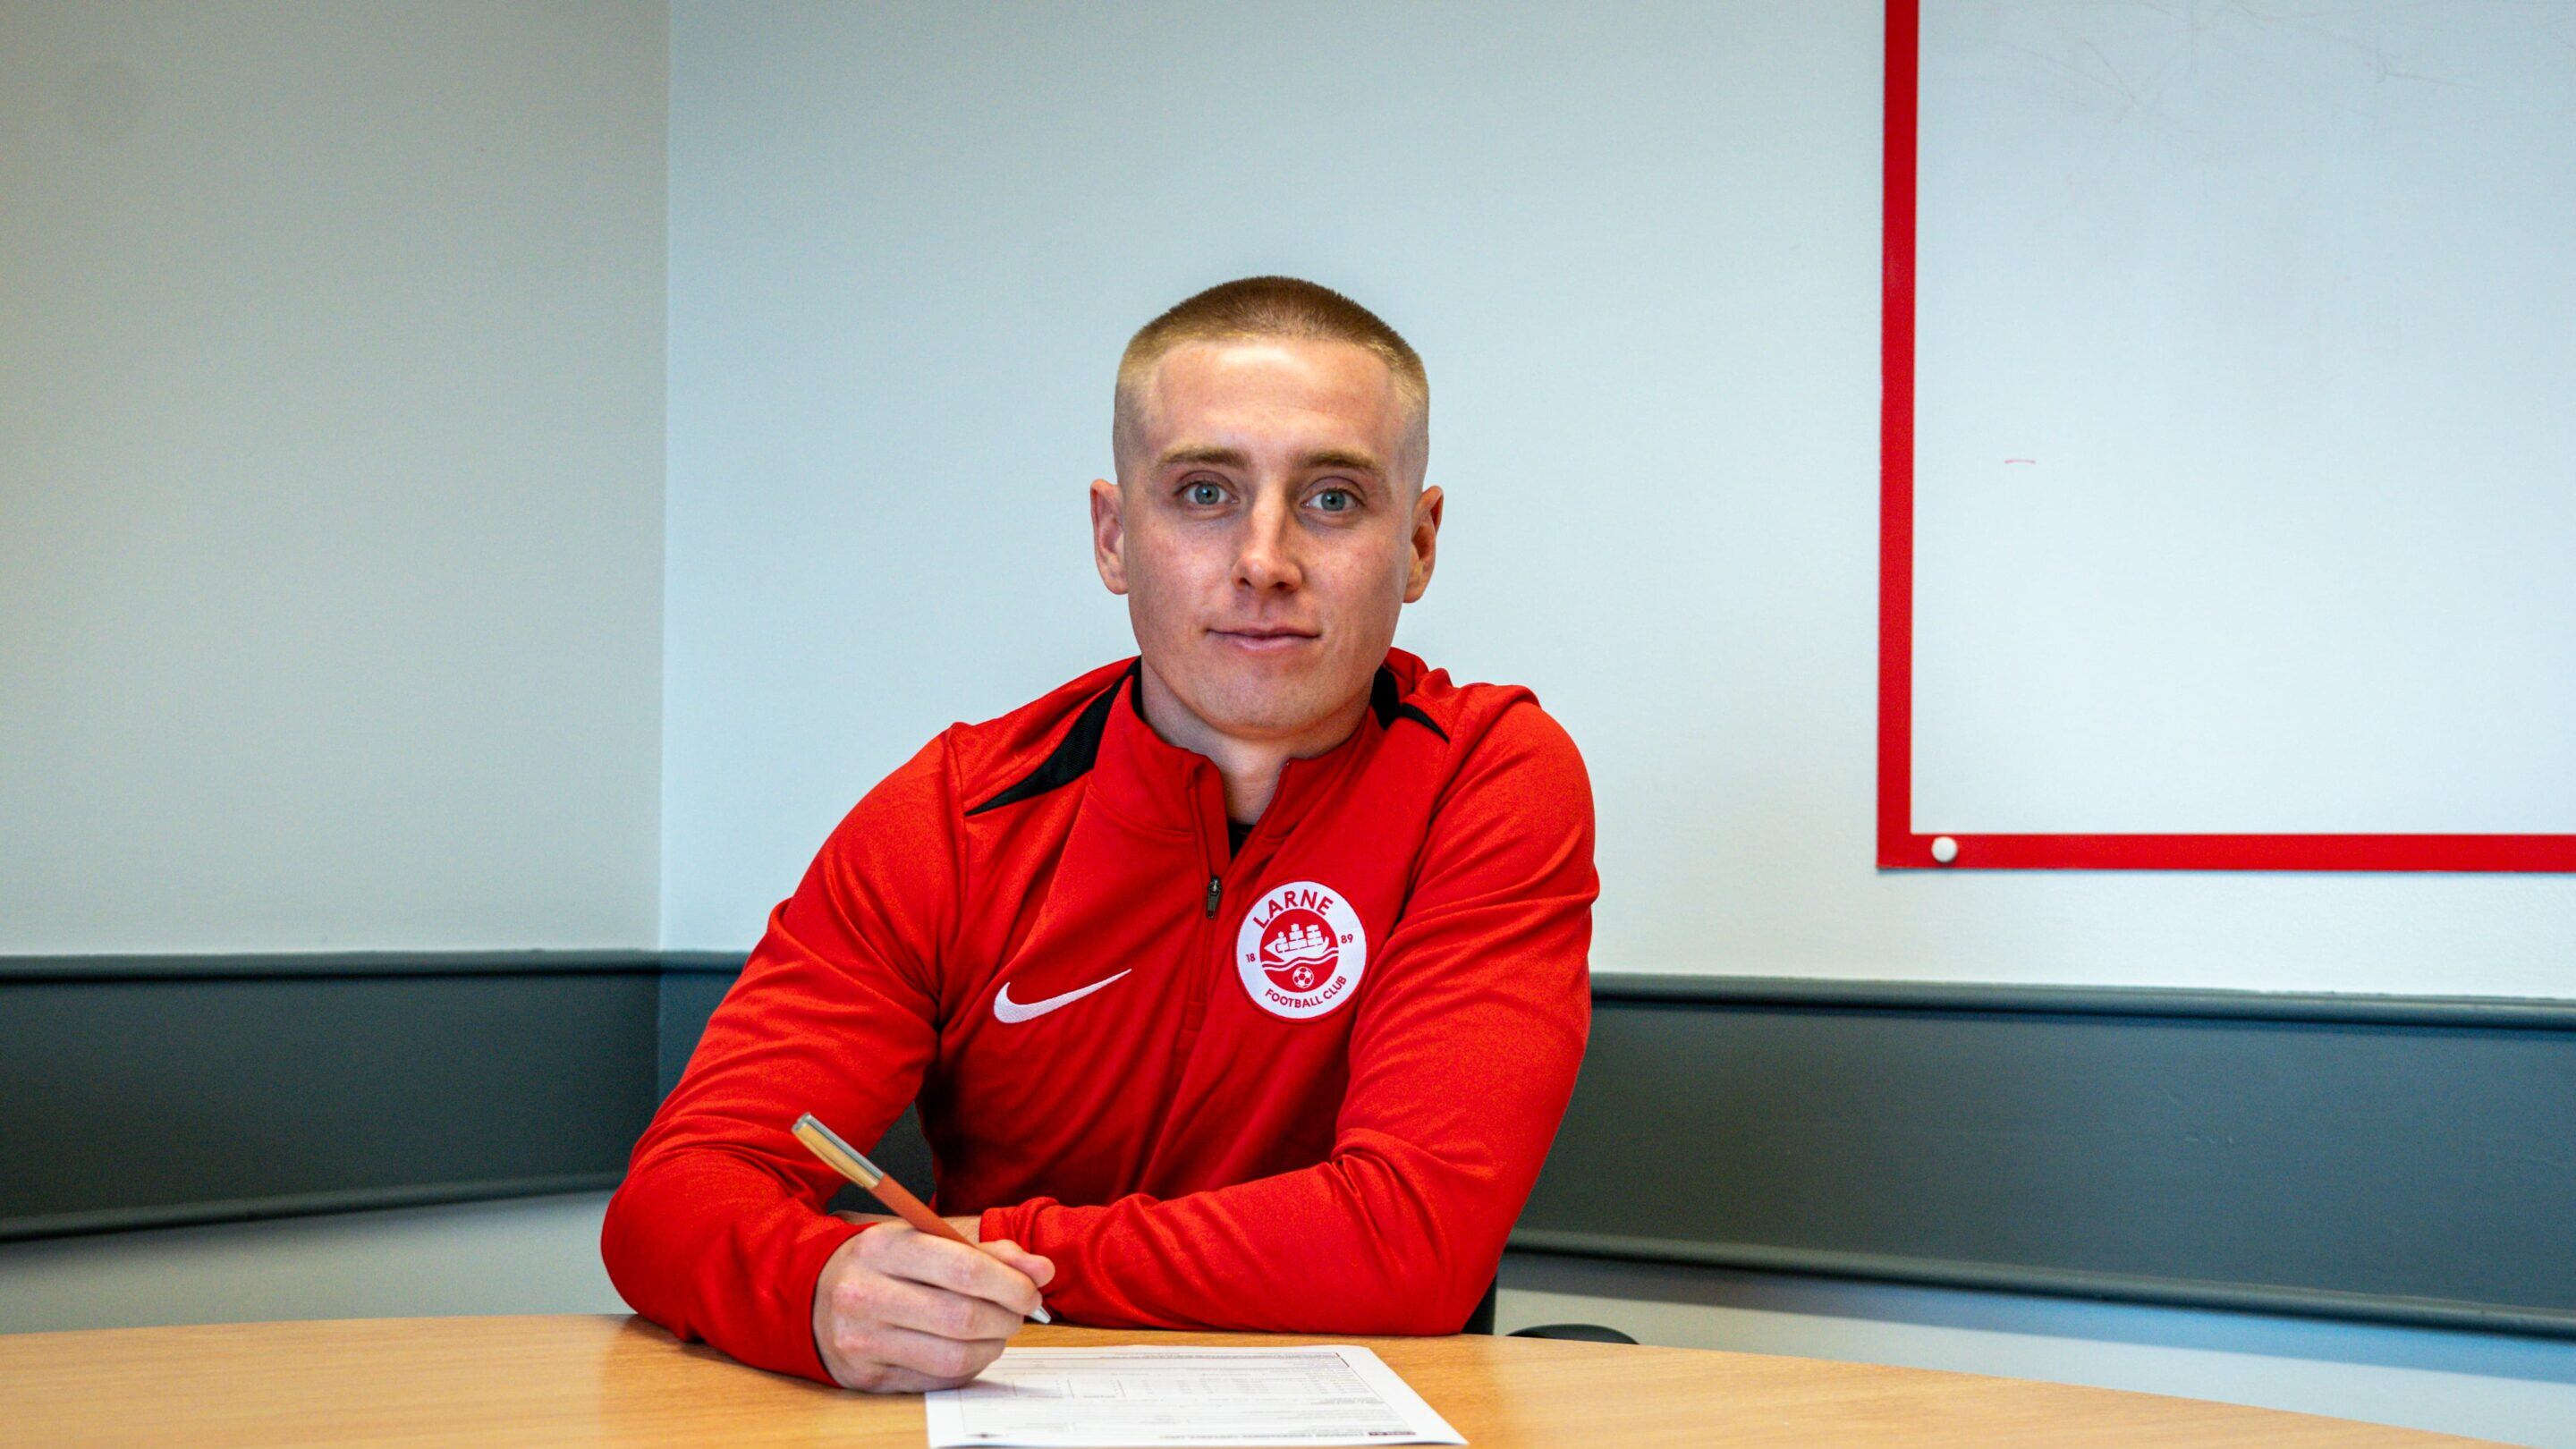 Conor McKendry signs on the dotted line as he returns to Larne